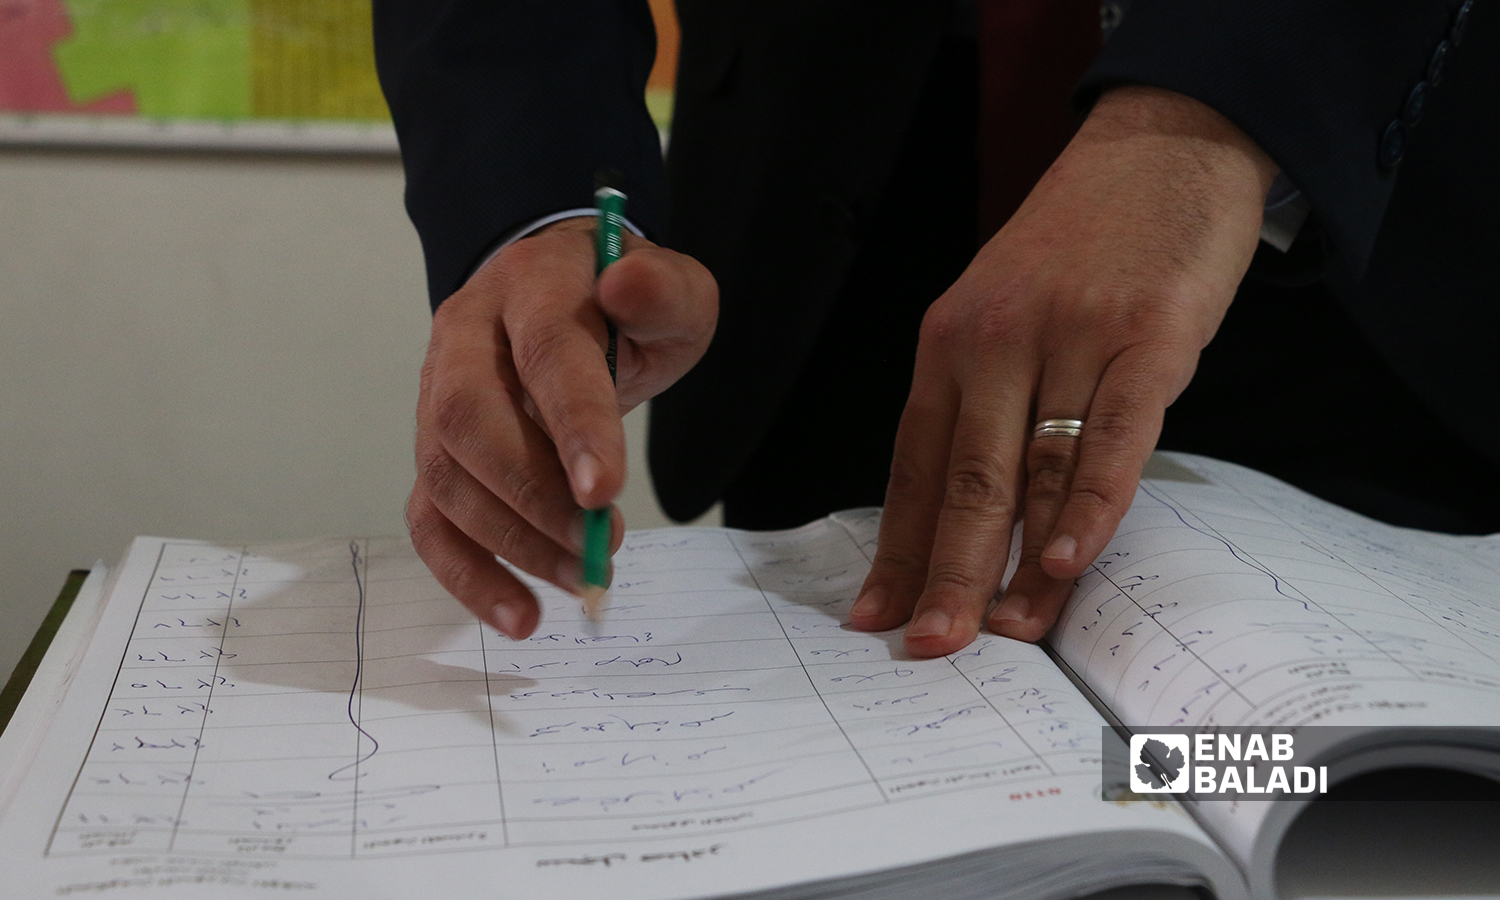 The authentication of diplomas at the Citizen Service Center (CSC) in Gaziantep (Enab Baladi)